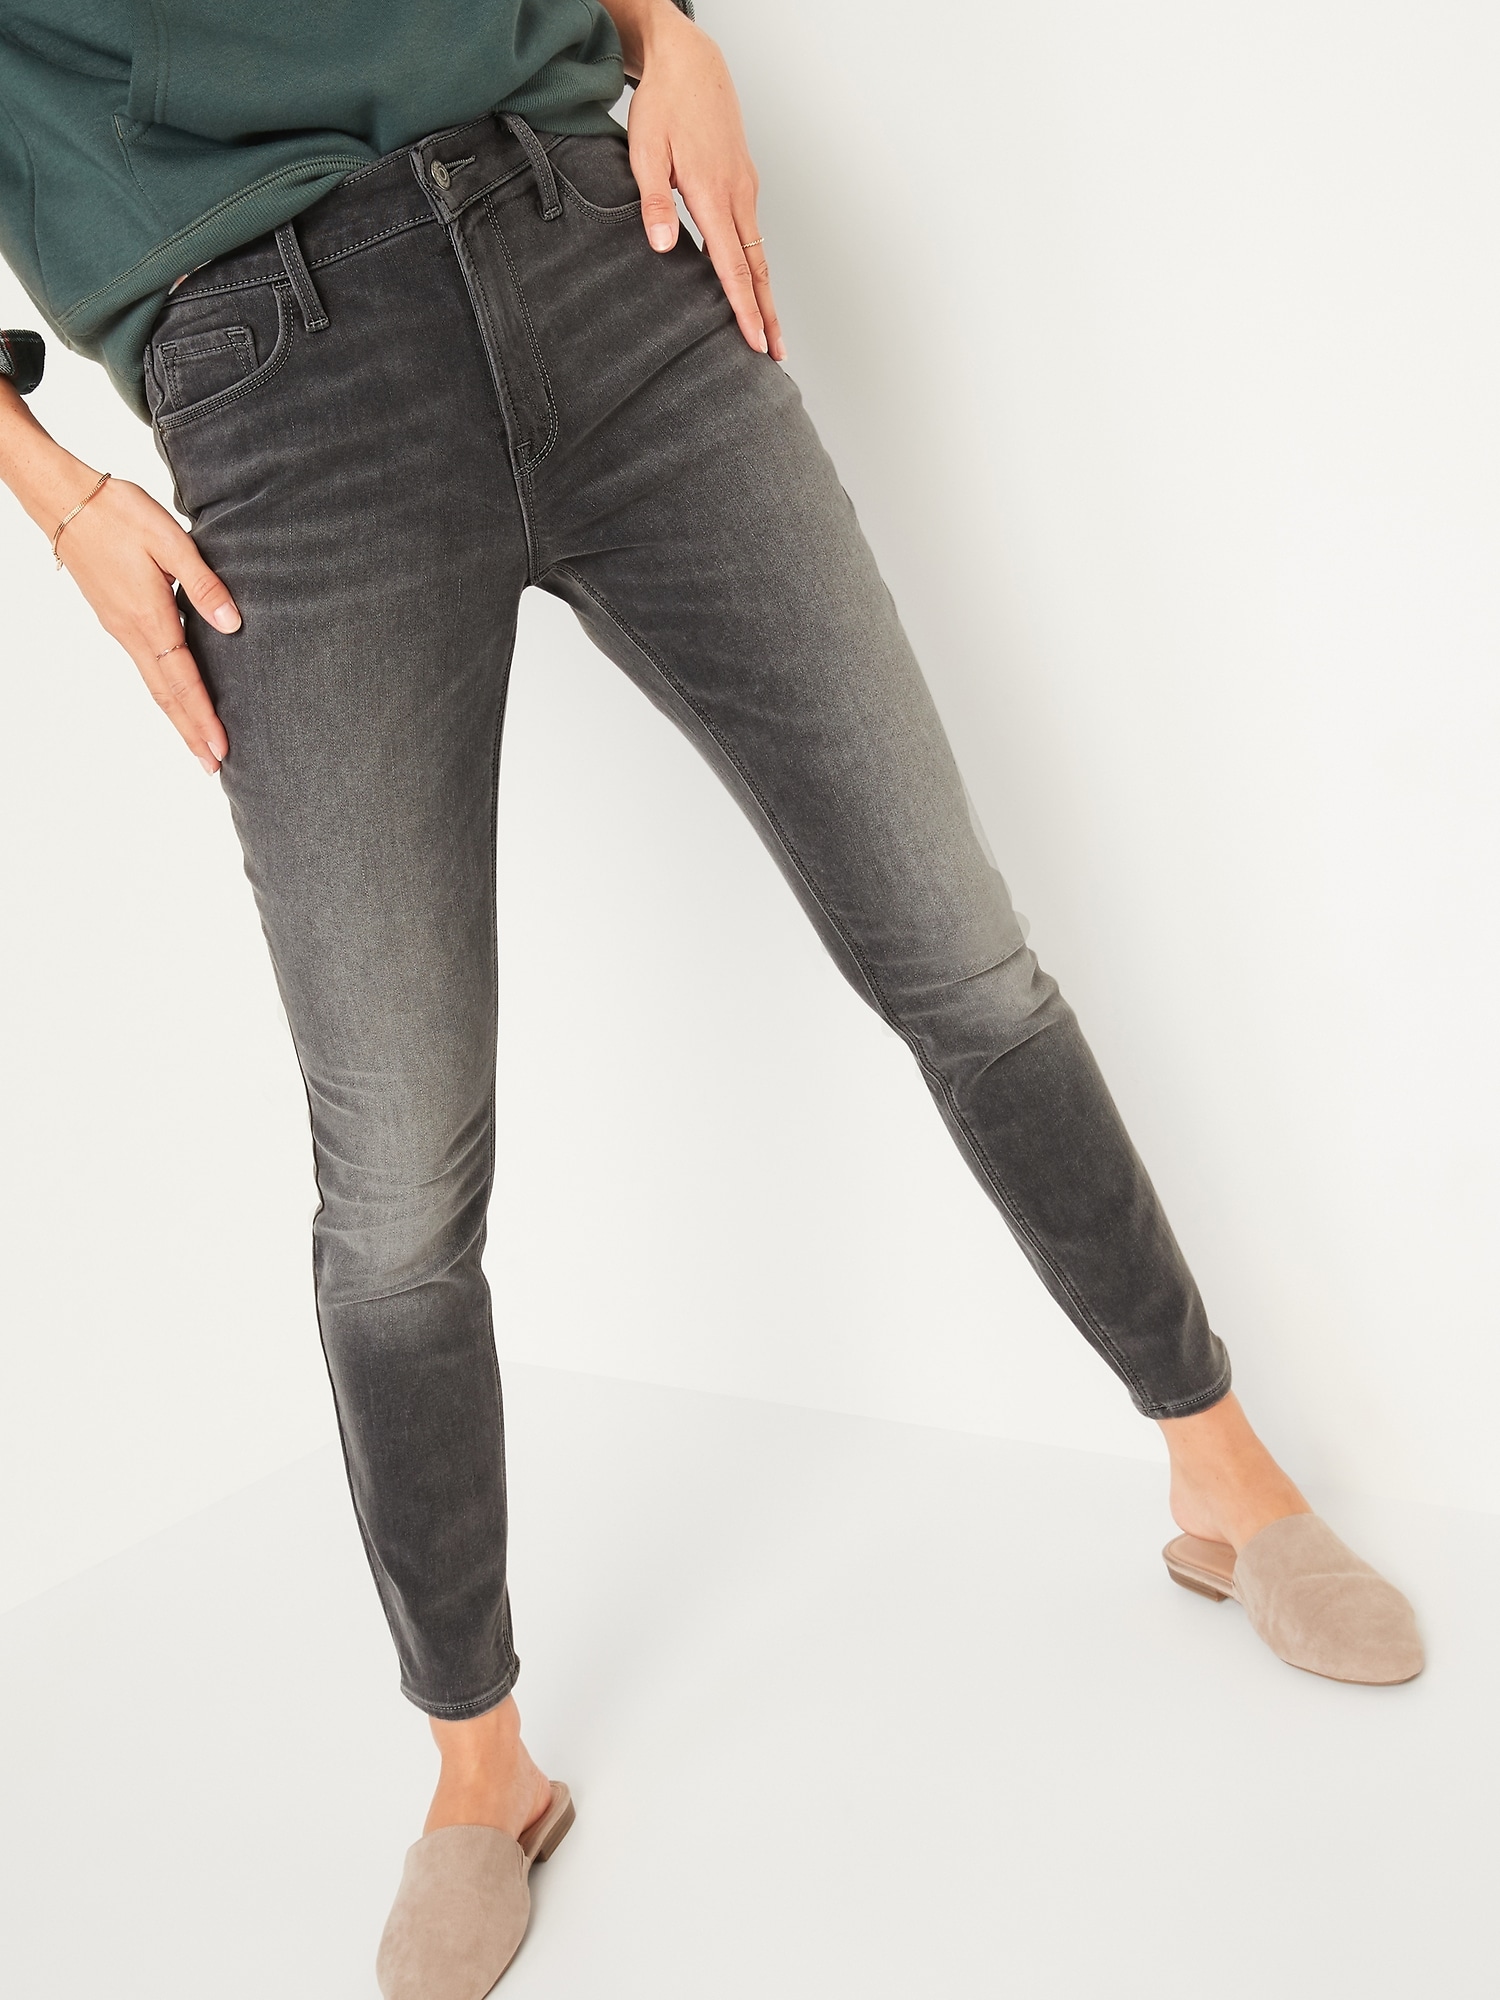 old navy grey jeans